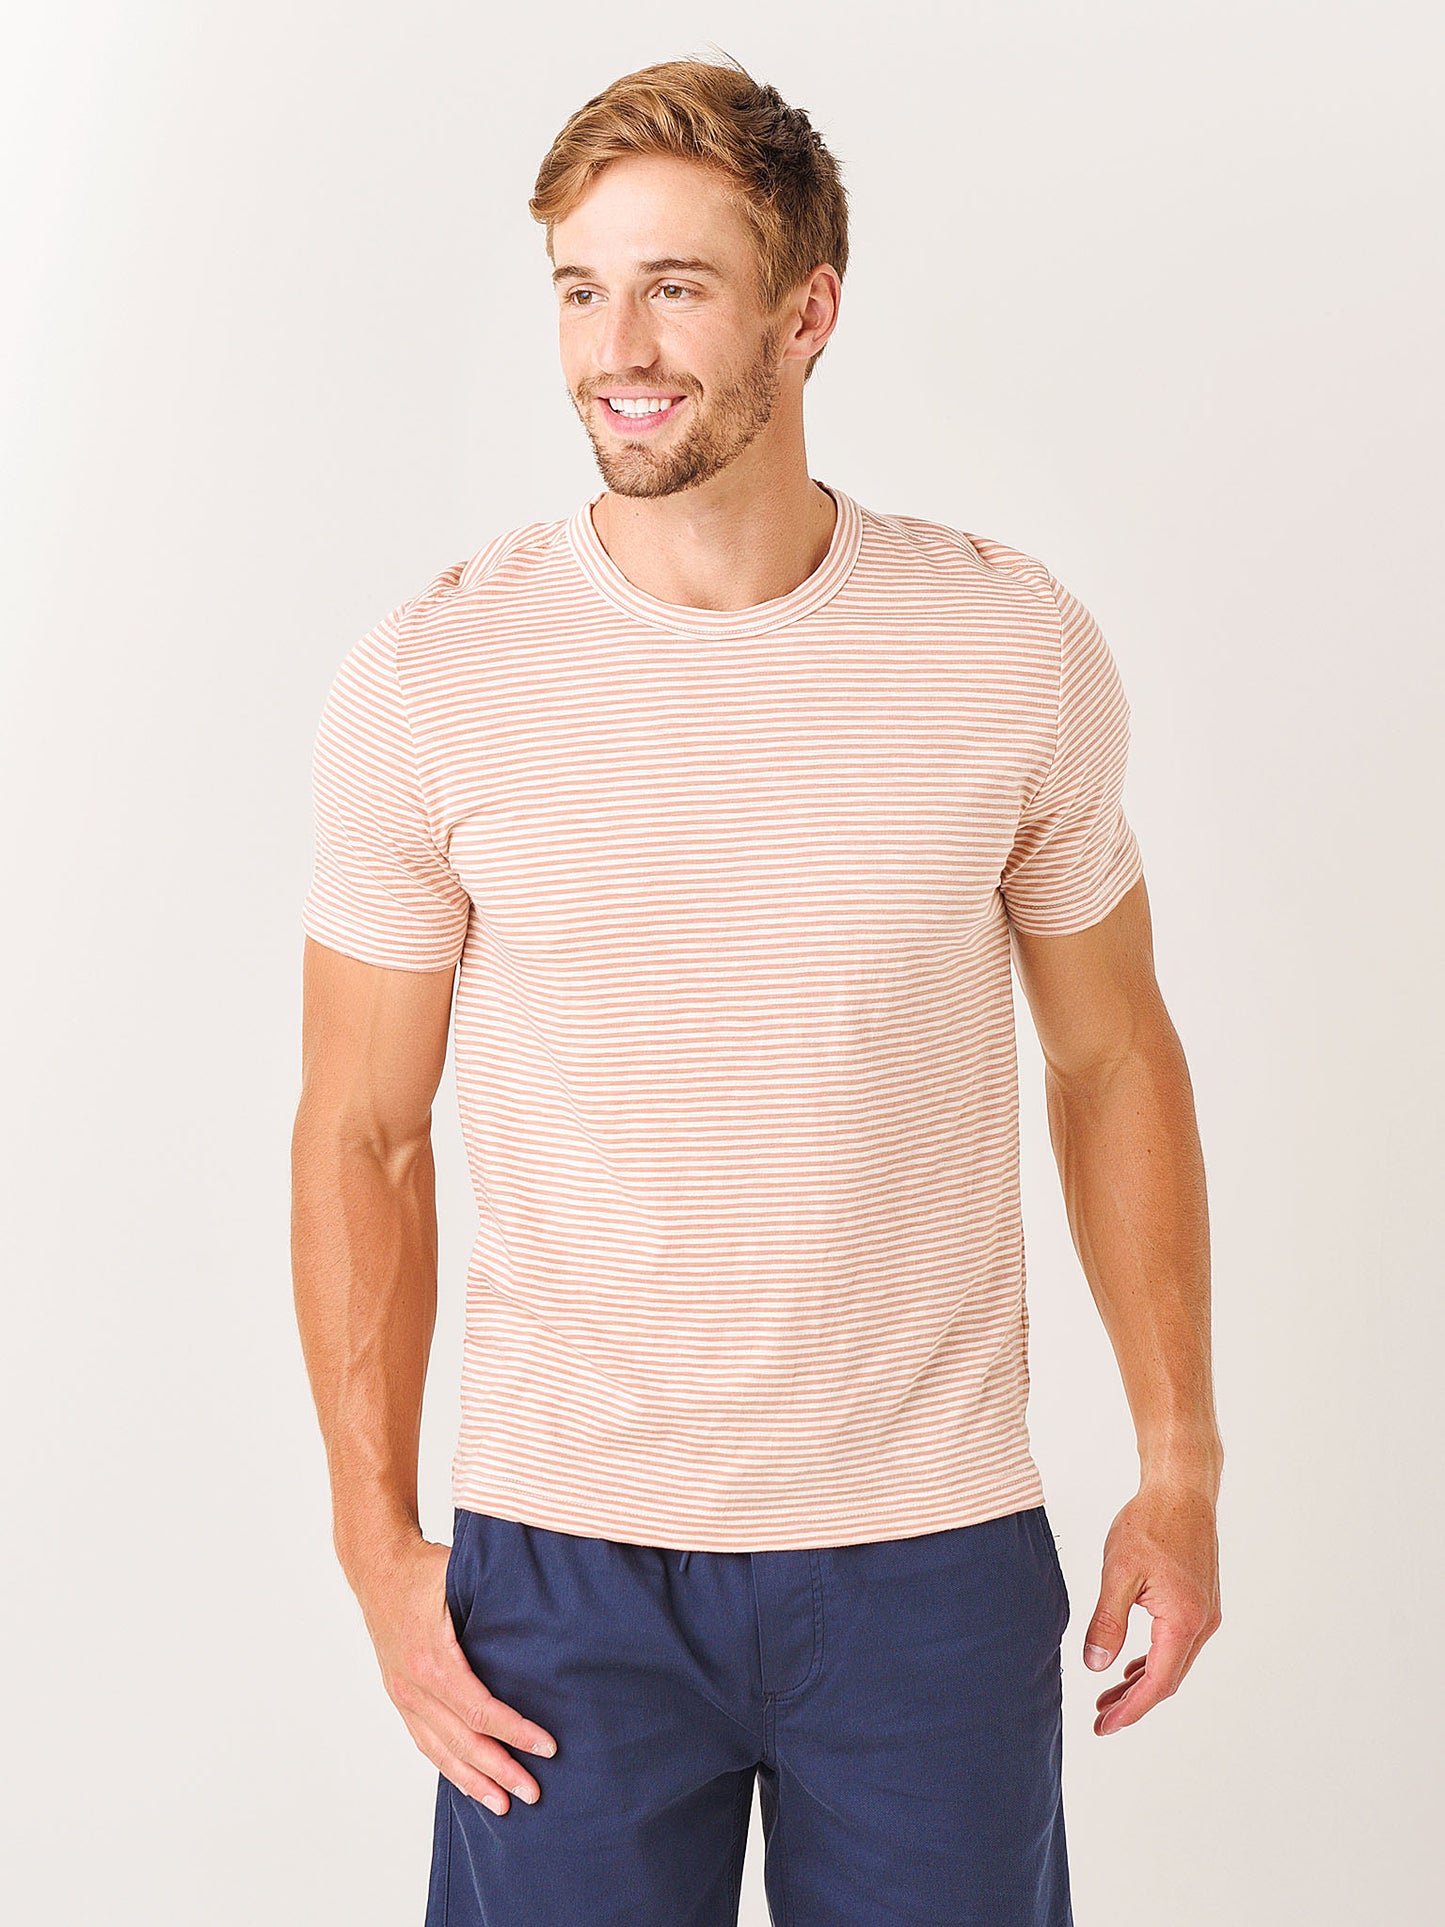 Faherty Brand Men's Salty Washed Striped Tee